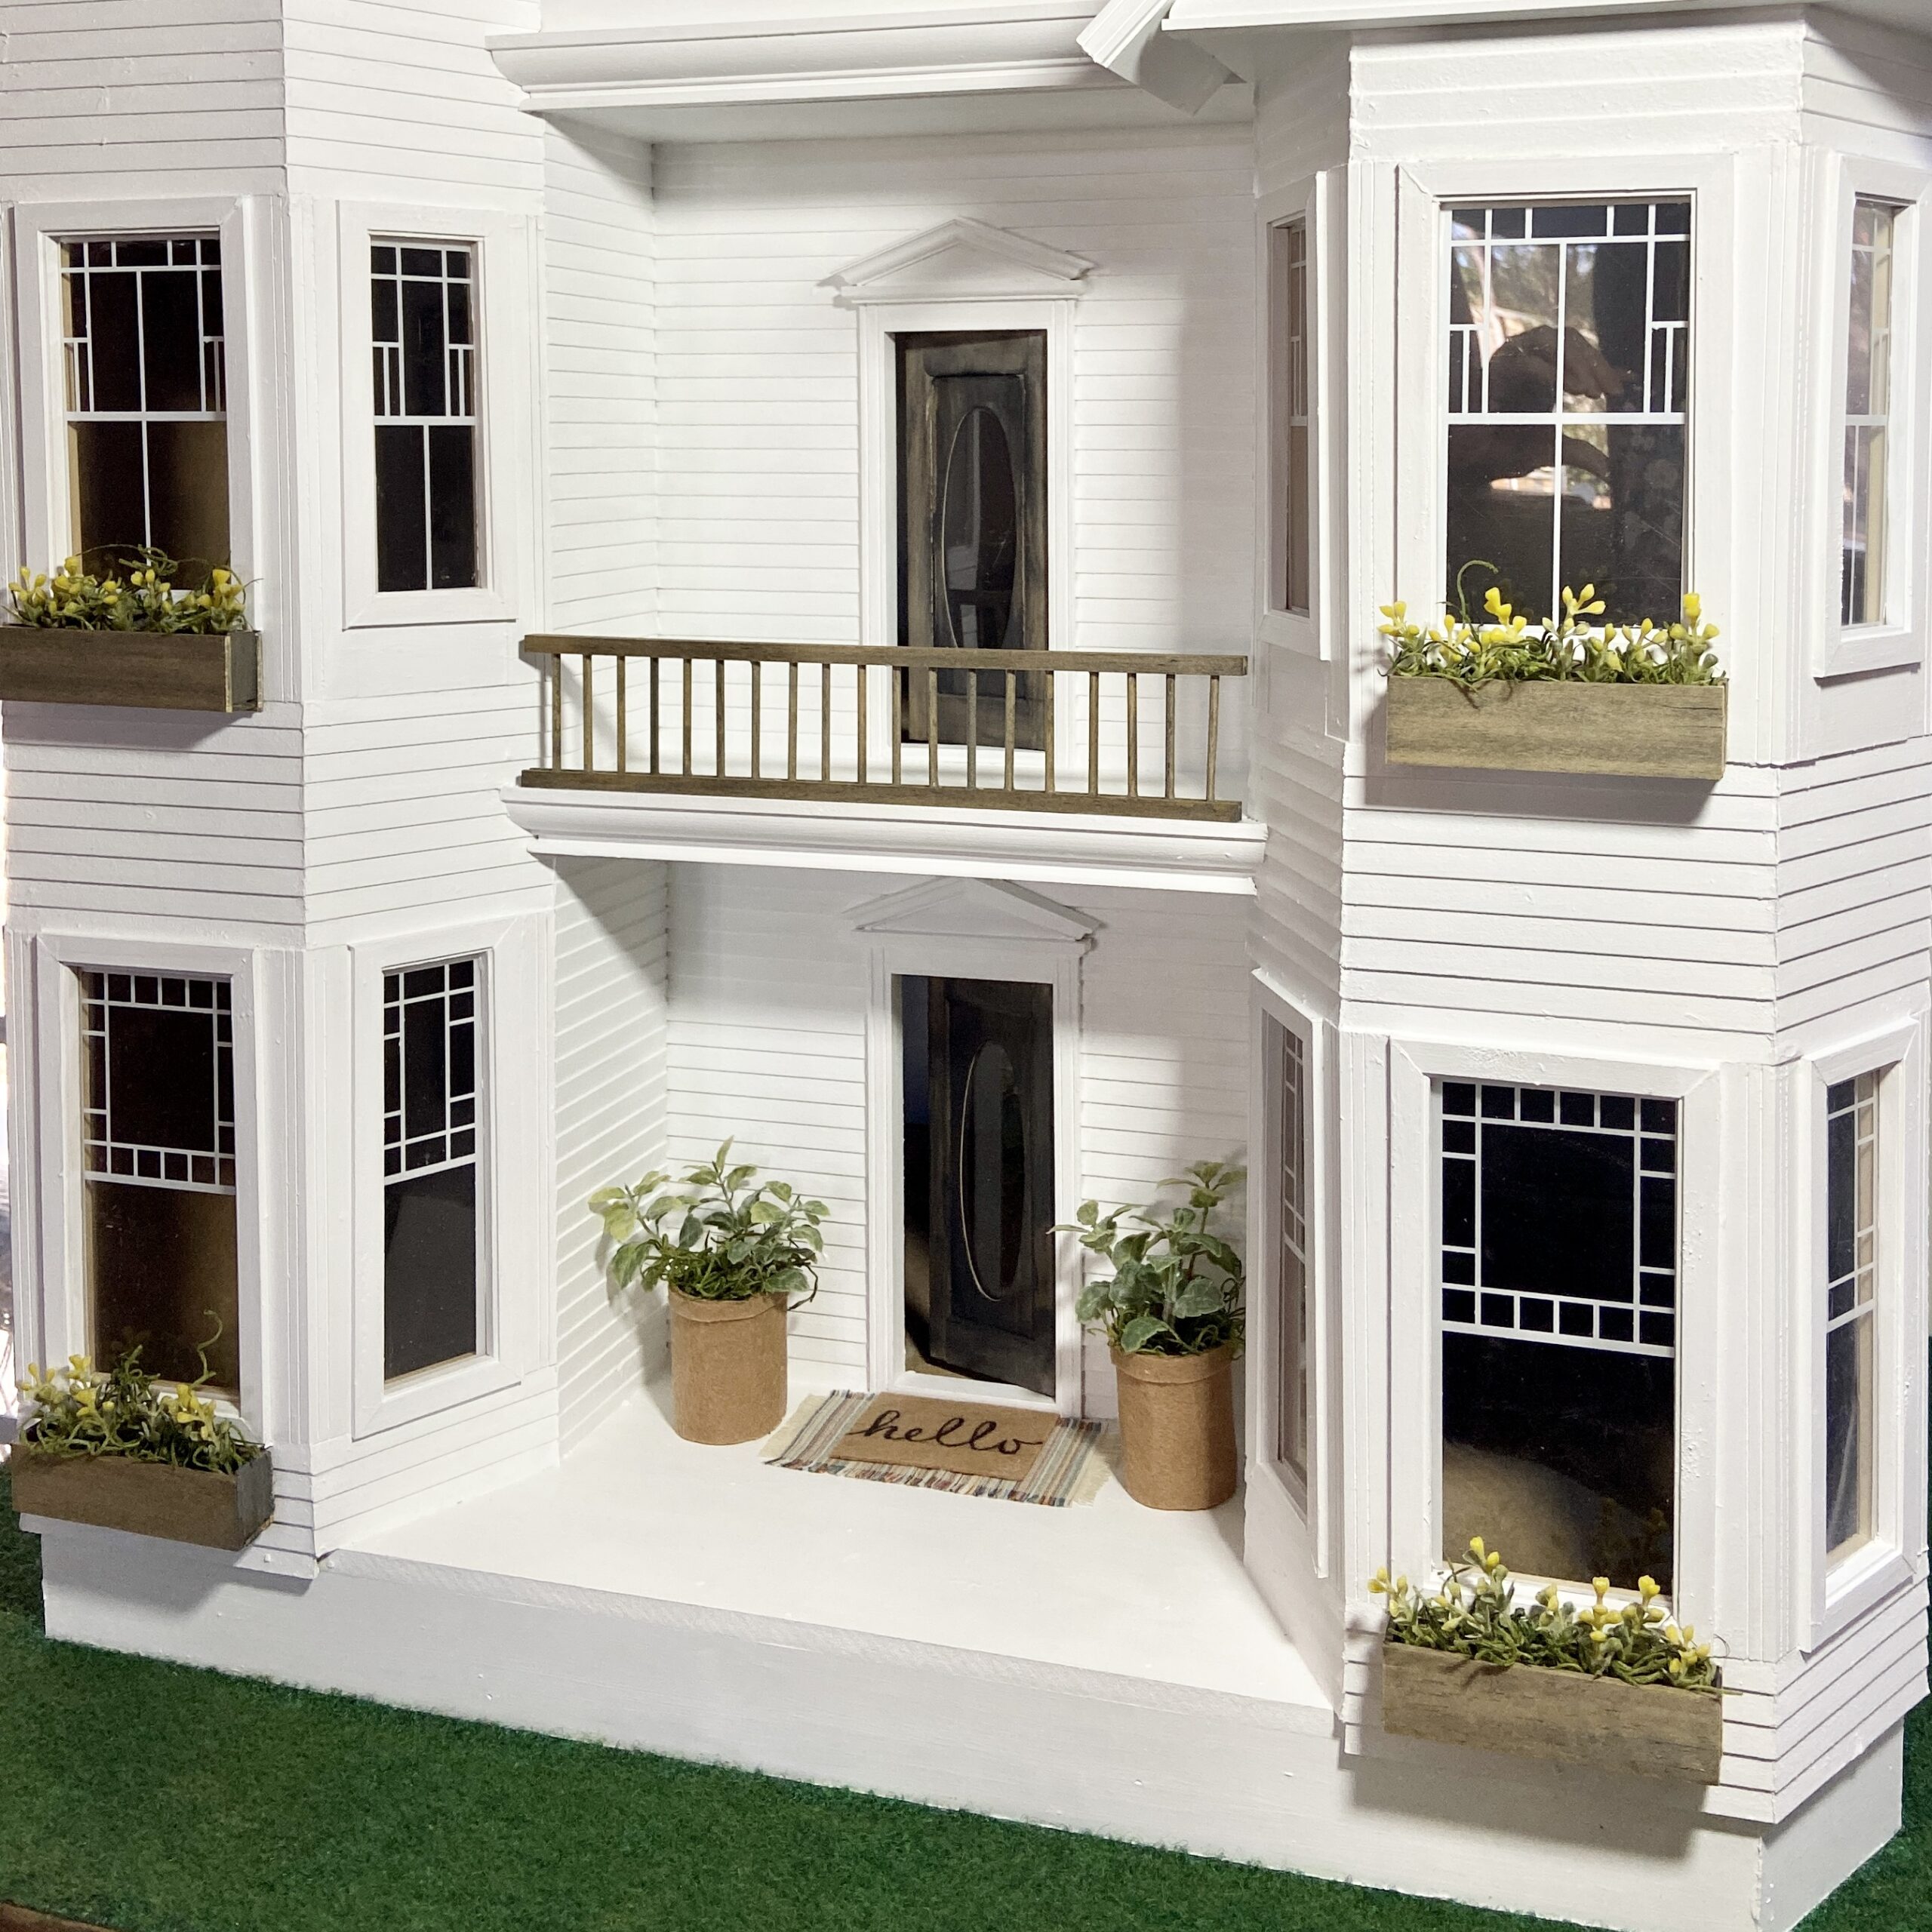 Small-Scale Charm: DIY Dollhouse Ideas for Your Front Porch